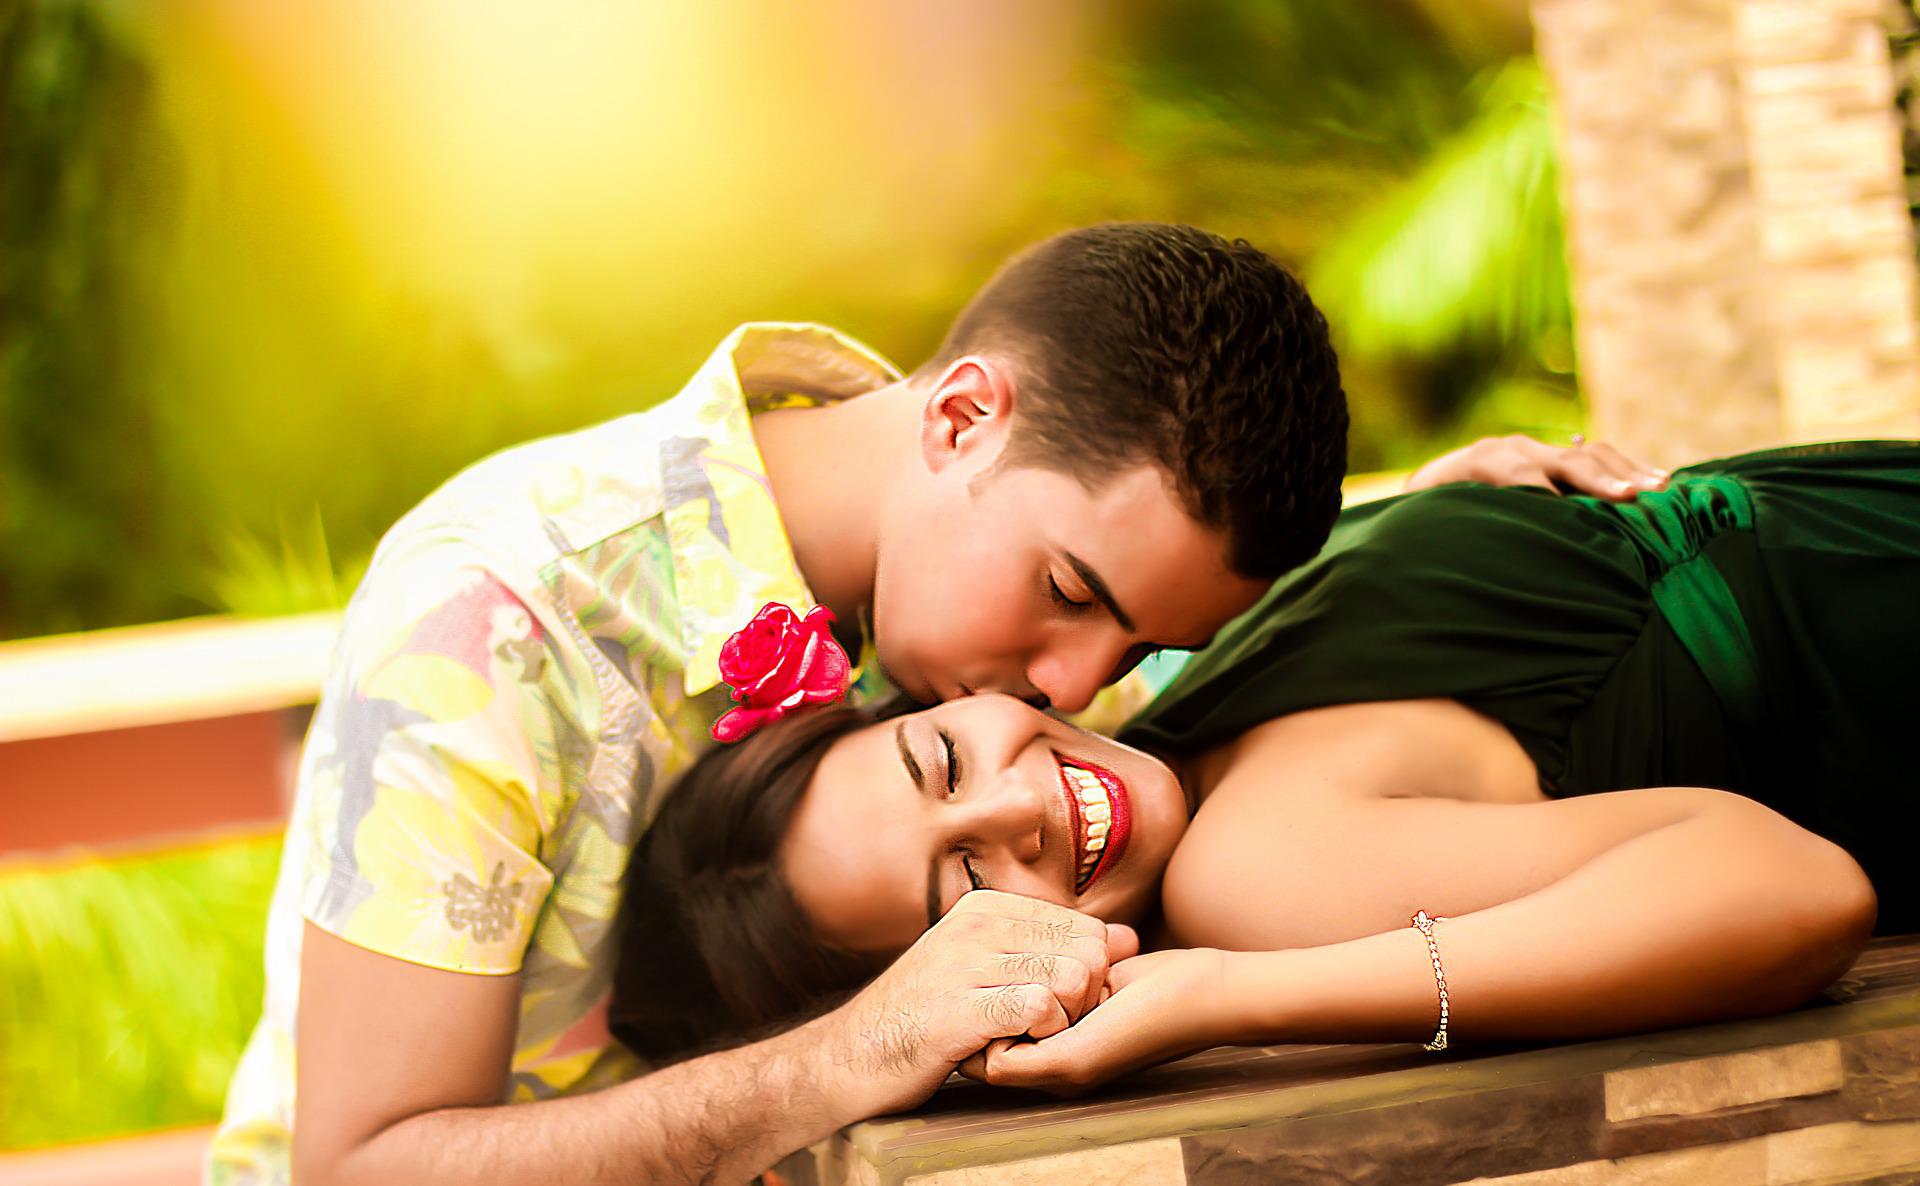 A woman lying on a wooden table while being kissed by his boyfriend